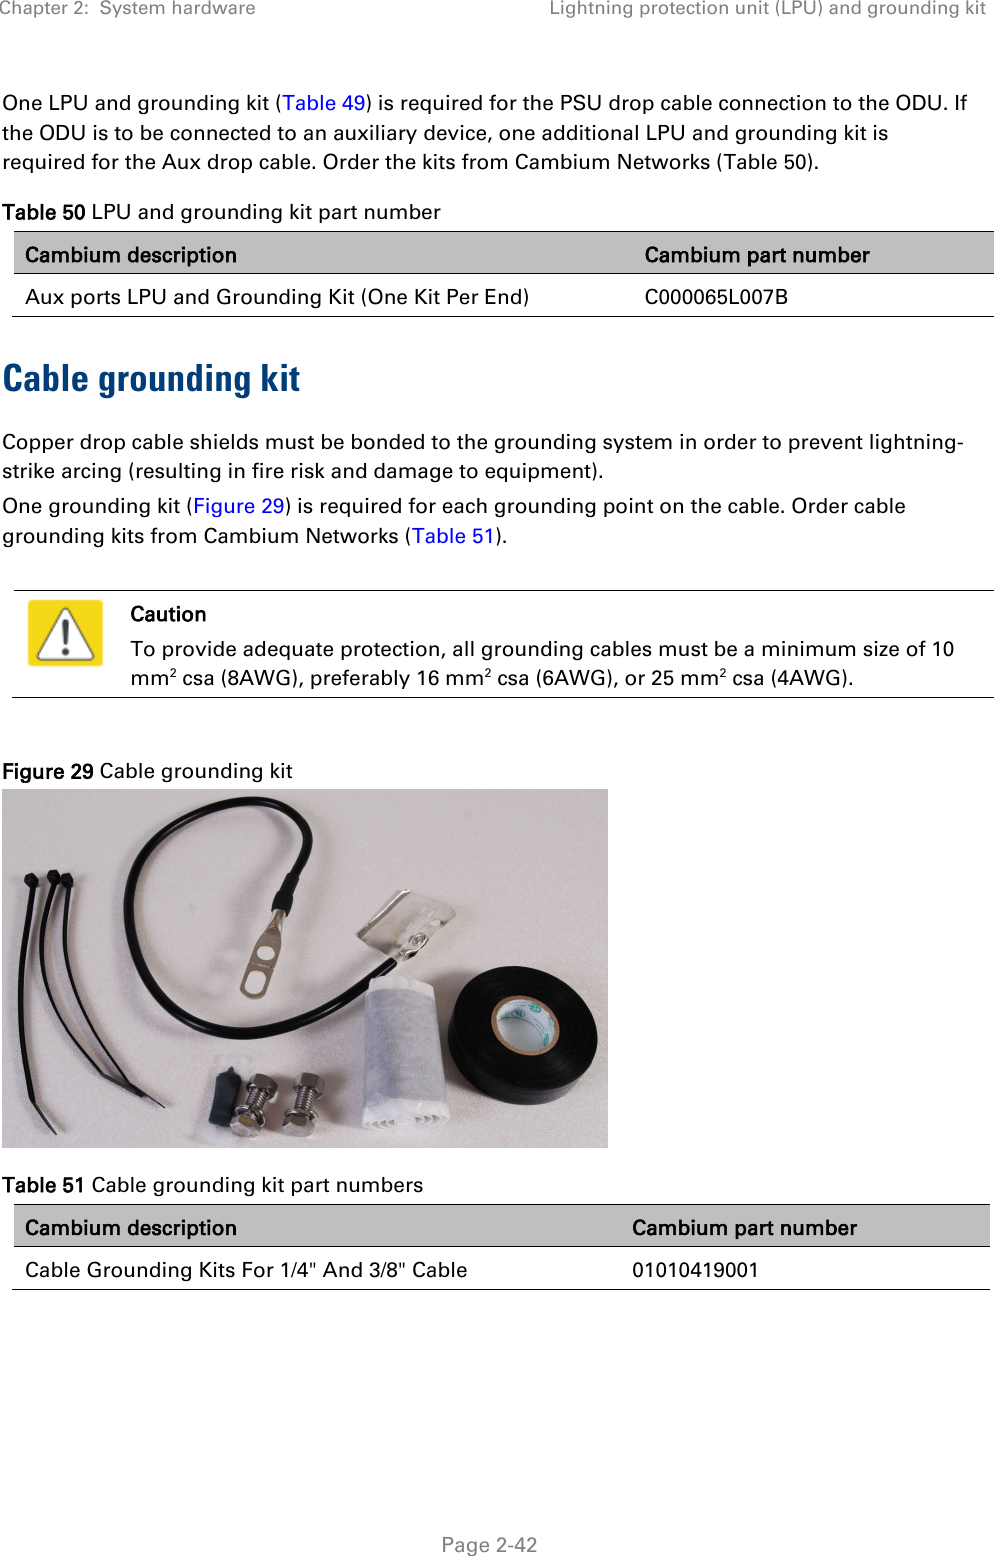 Chapter 2:  System hardware Lightning protection unit (LPU) and grounding kit   Page 2-42 One LPU and grounding kit (Table 49) is required for the PSU drop cable connection to the ODU. If the ODU is to be connected to an auxiliary device, one additional LPU and grounding kit is required for the Aux drop cable. Order the kits from Cambium Networks (Table 50). Table 50 LPU and grounding kit part number Cambium description Cambium part number Aux ports LPU and Grounding Kit (One Kit Per End)   C000065L007B Cable grounding kit Copper drop cable shields must be bonded to the grounding system in order to prevent lightning-strike arcing (resulting in fire risk and damage to equipment). One grounding kit (Figure 29) is required for each grounding point on the cable. Order cable grounding kits from Cambium Networks (Table 51).   Caution To provide adequate protection, all grounding cables must be a minimum size of 10 mm2 csa (8AWG), preferably 16 mm2 csa (6AWG), or 25 mm2 csa (4AWG).  Figure 29 Cable grounding kit  Table 51 Cable grounding kit part numbers Cambium description Cambium part number Cable Grounding Kits For 1/4&quot; And 3/8&quot; Cable 01010419001  